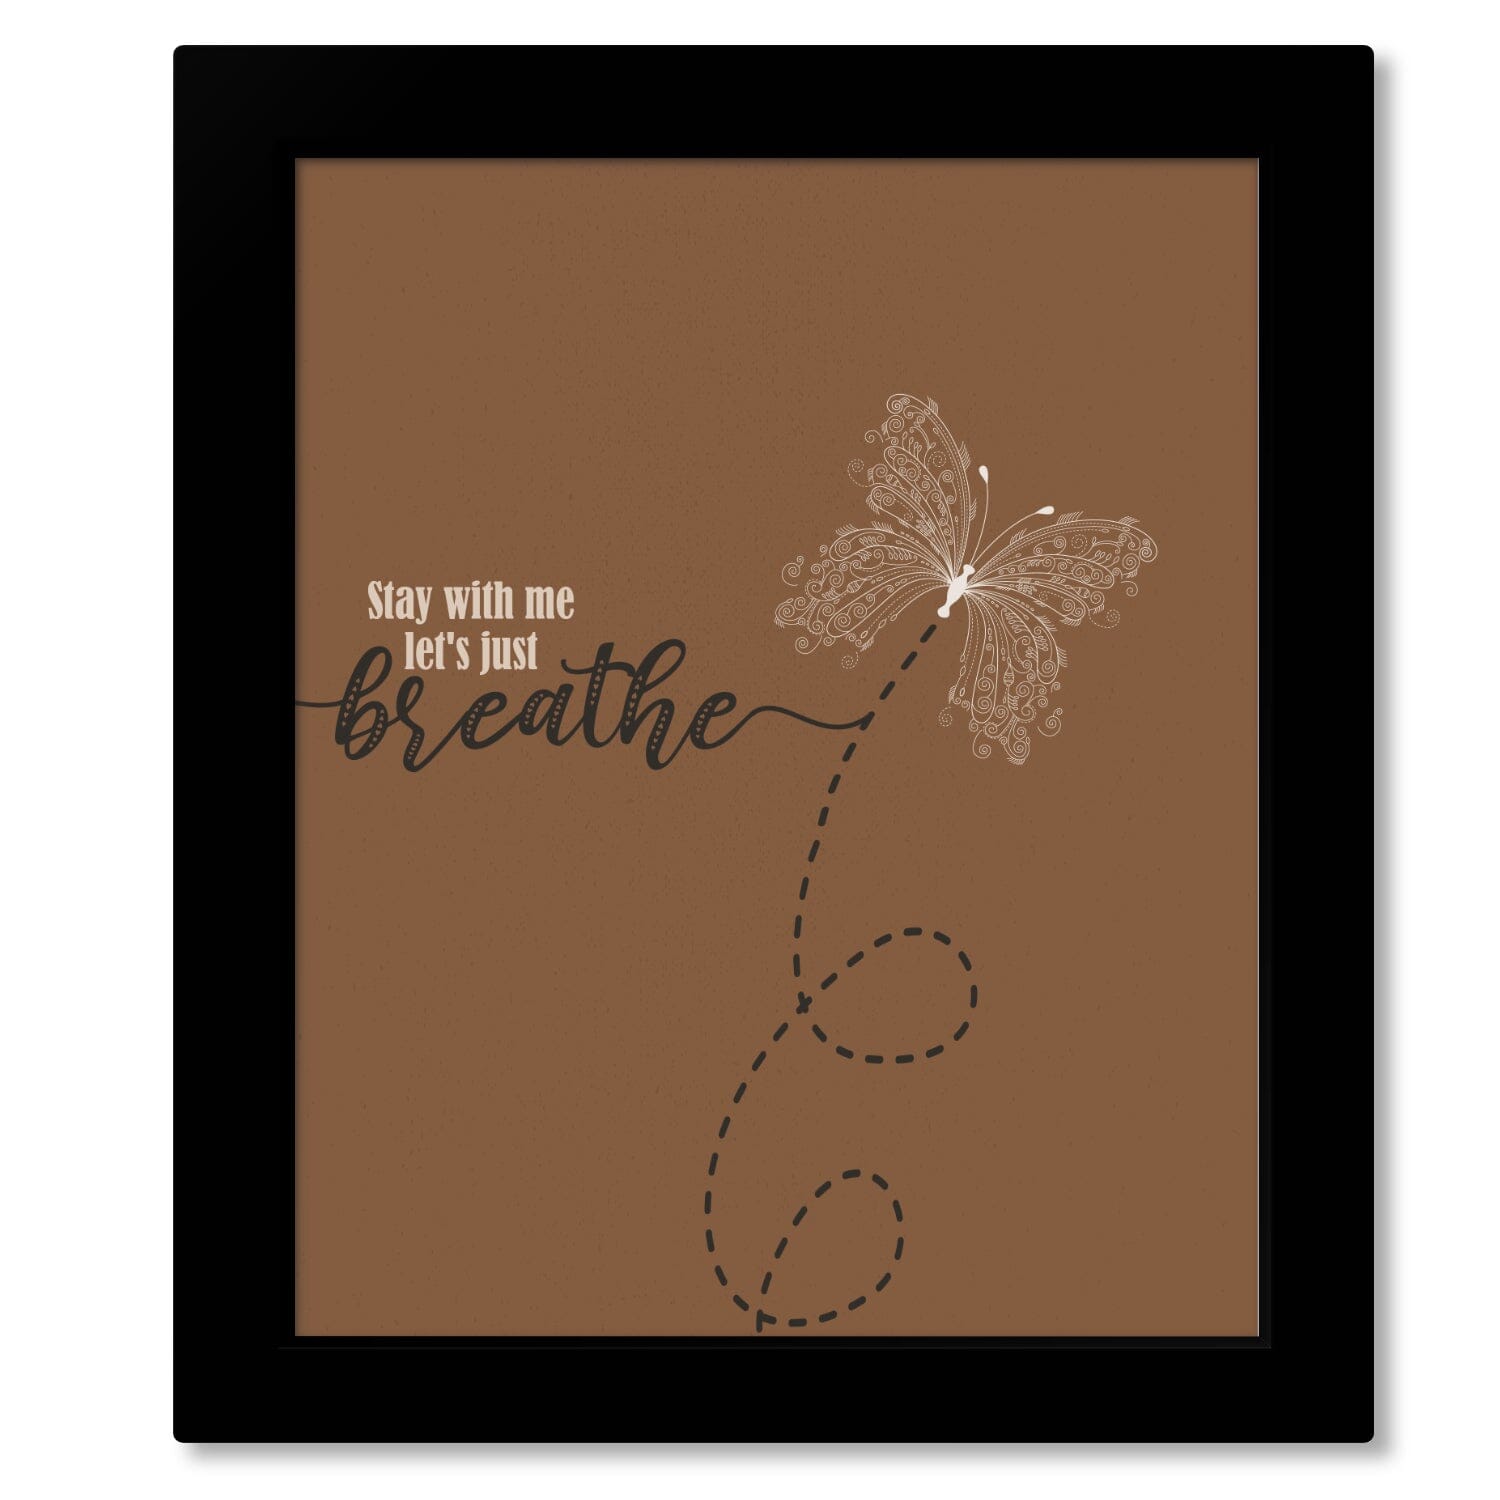 Just Breathe by the Pearl Jam - Song Lyric Wall Art Prints Song Lyrics Art Song Lyrics Art 8x10 Framed Print (without mat) 